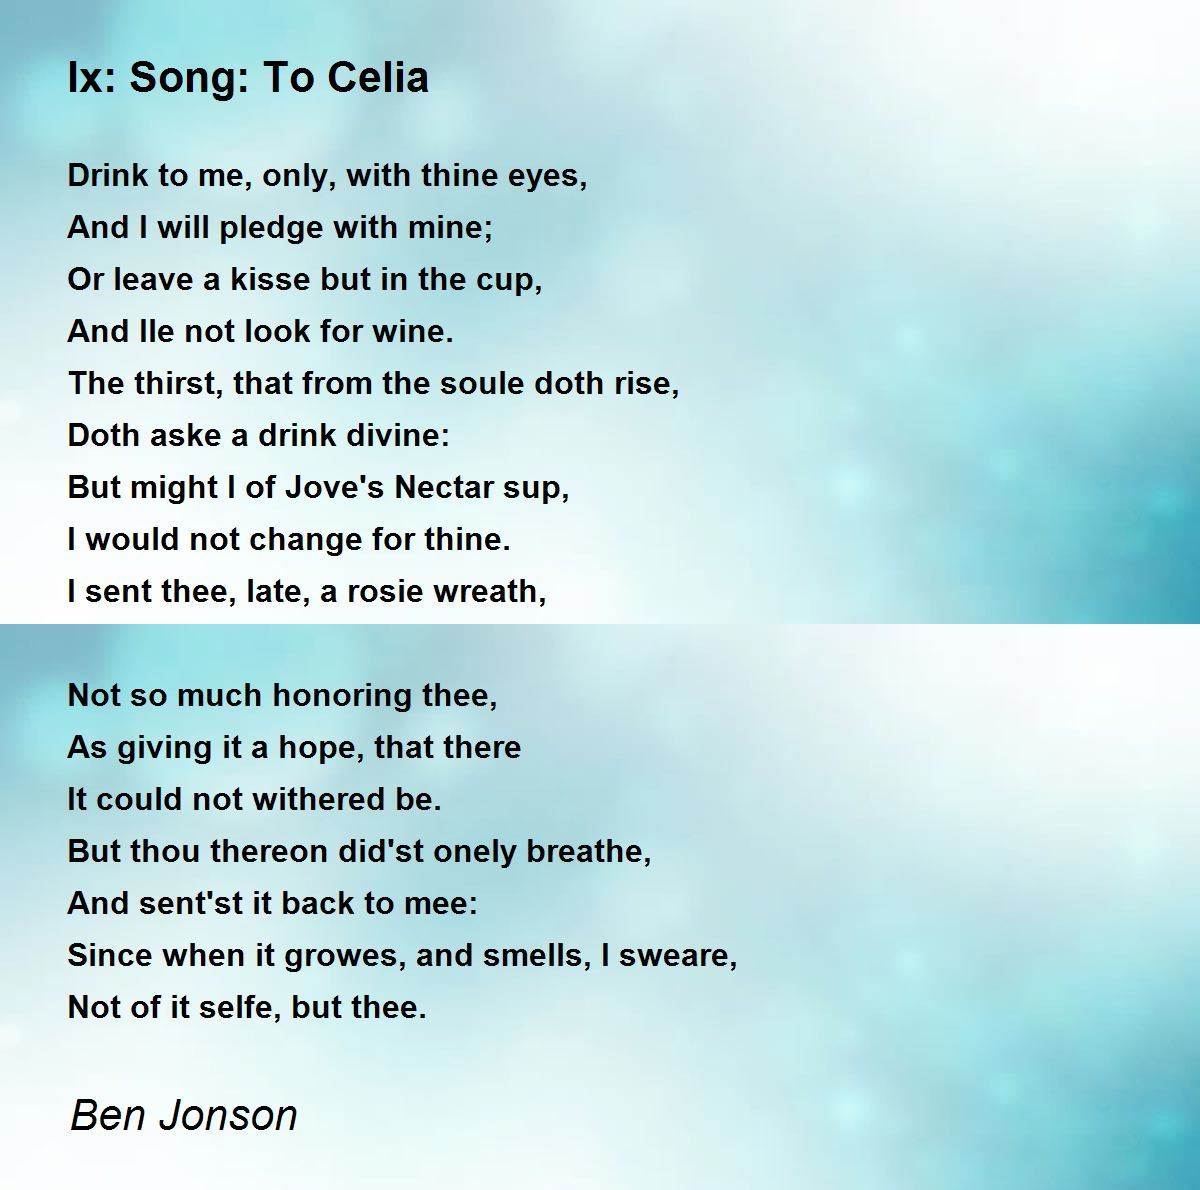 Song to Celia